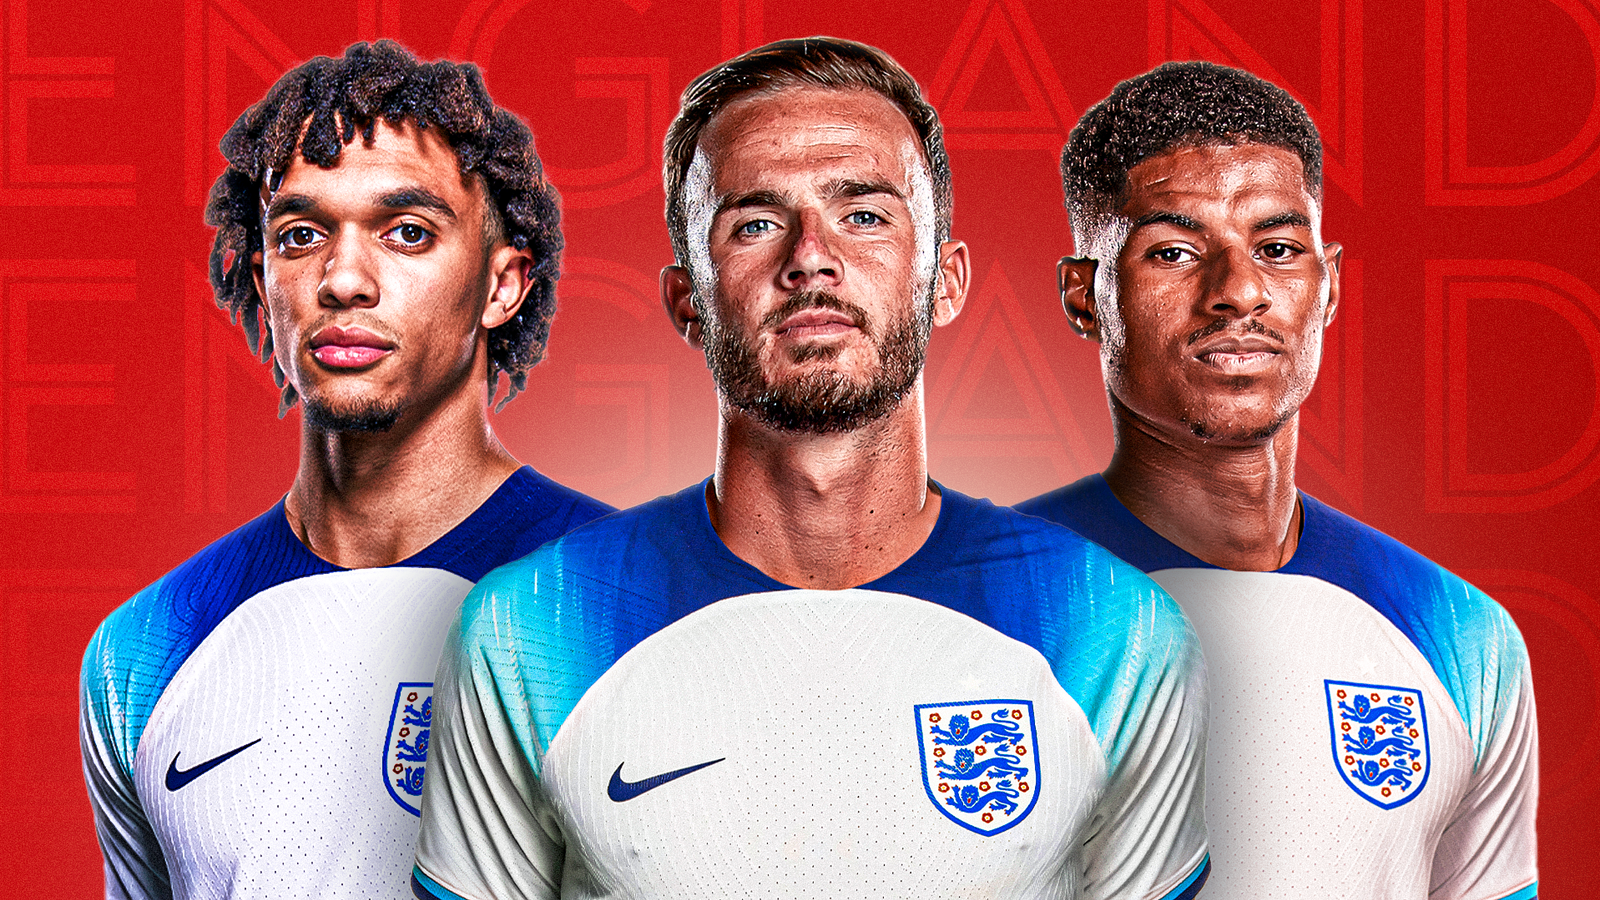 england-world-cup-squad-james-maddison-and-marcus-rashford-set-to-make-headlines-as-decision-time-looms